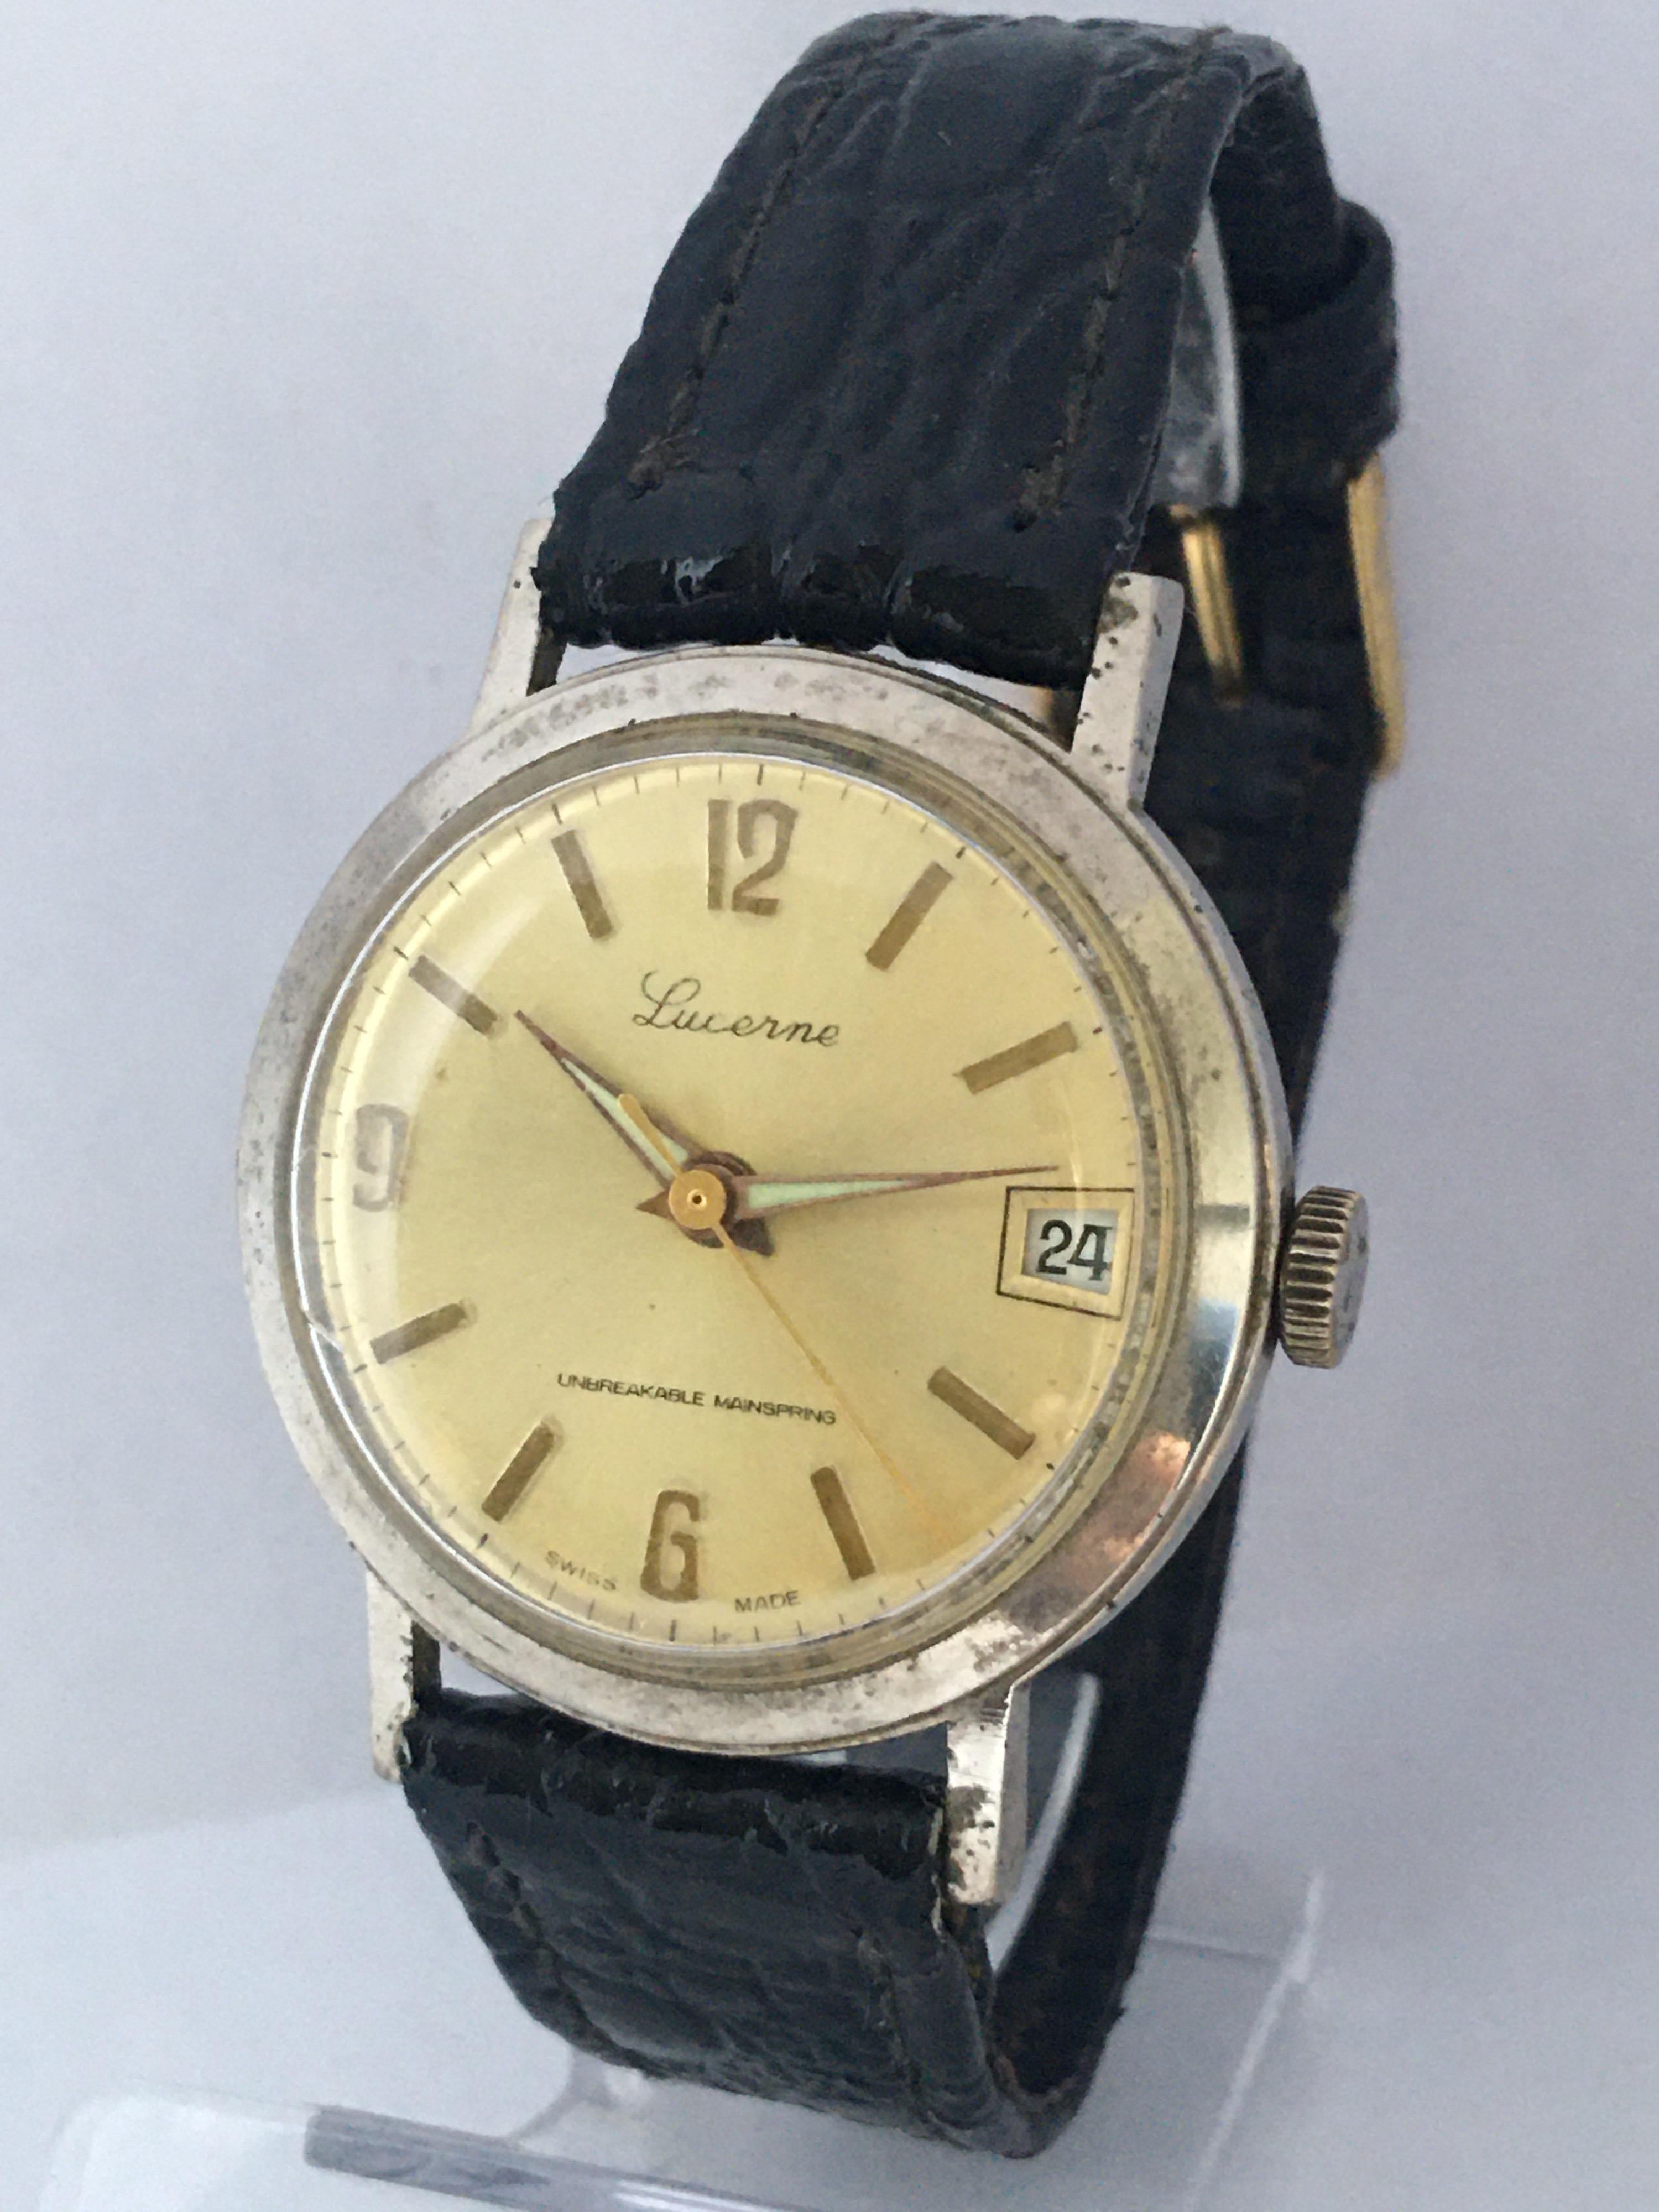 This beautiful pre-owned 34mm diameter vintage hand winding watch is in good working condition and it is ticking and running well. Visible signs of ageing and wear with light scratches on the glass and on the watch case as shown. The buckle strap is